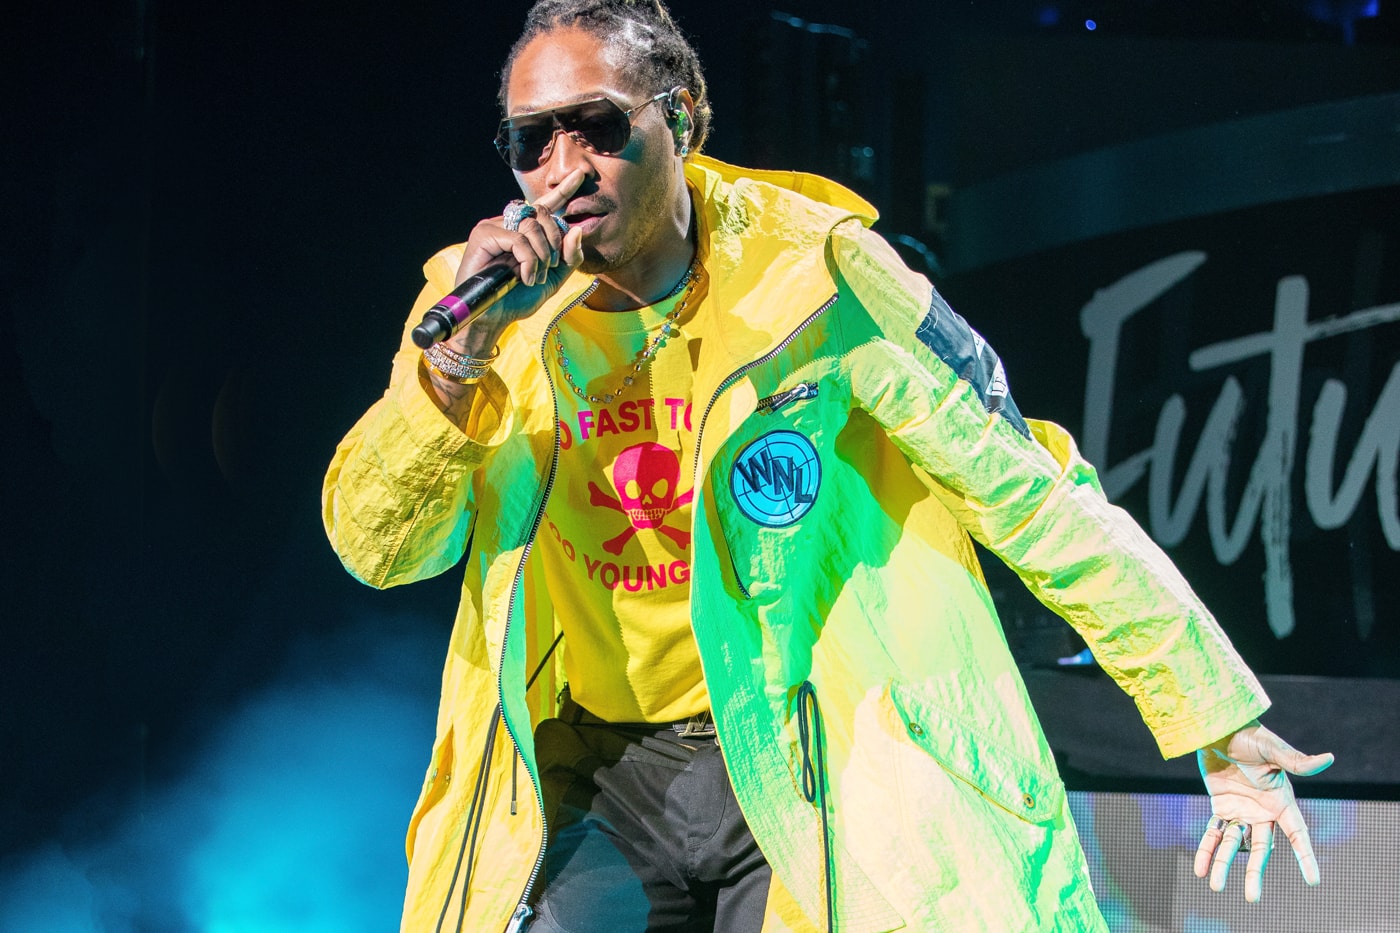 Future Announces New Album and Drops New Song